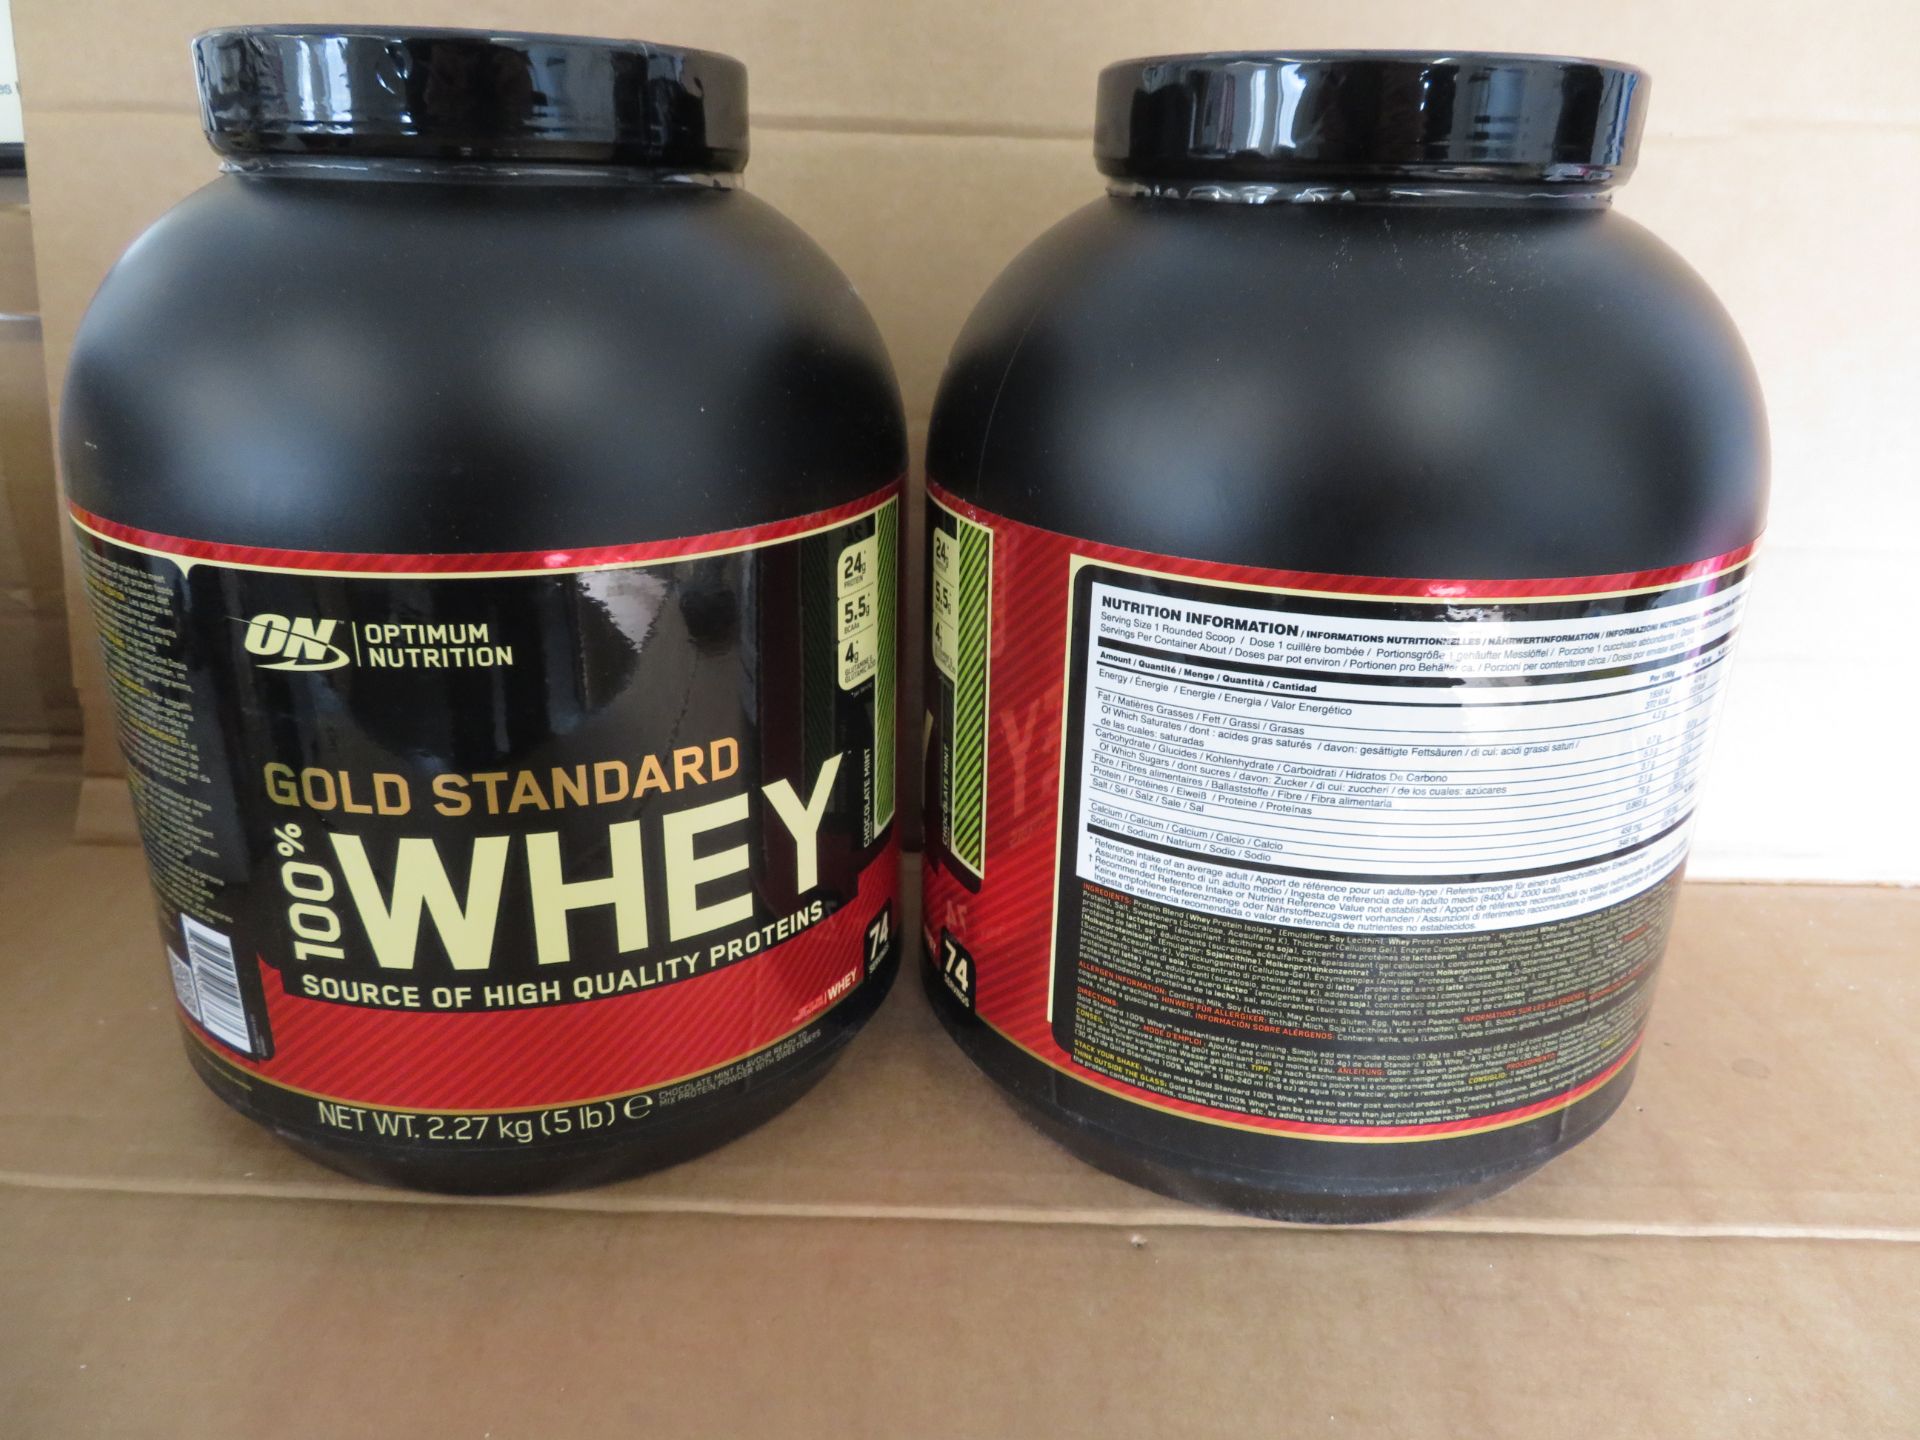 4 x New & Sealed 2.27KG Tubs Of Optimum Nutrition. RRP £49.99 PER TUB. Gold Standard 100% Whey.